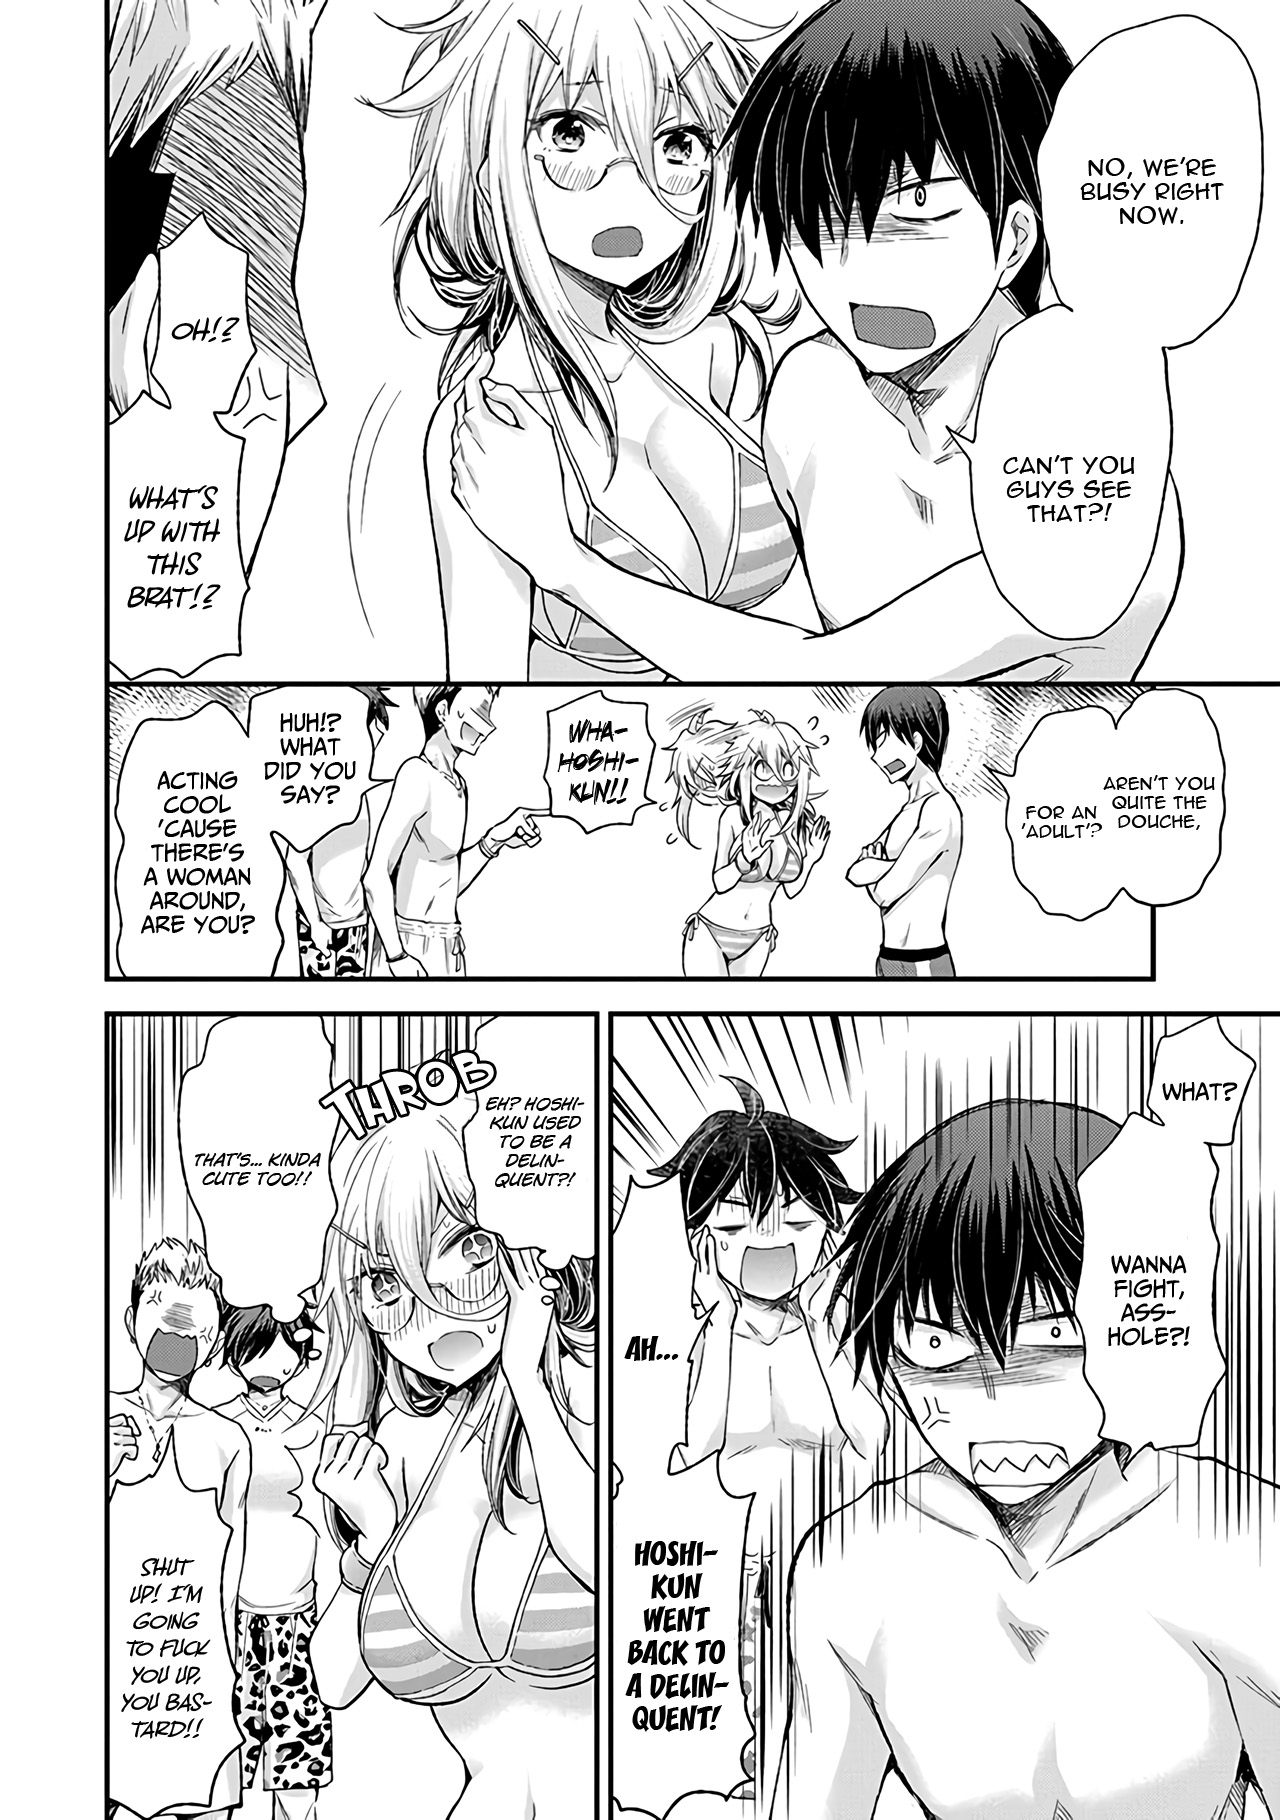 Shingeki no Eroko san Vol. 1 Ch. 6 Thank you, summer, for letting me look at high school boys' swimsuits all I want!